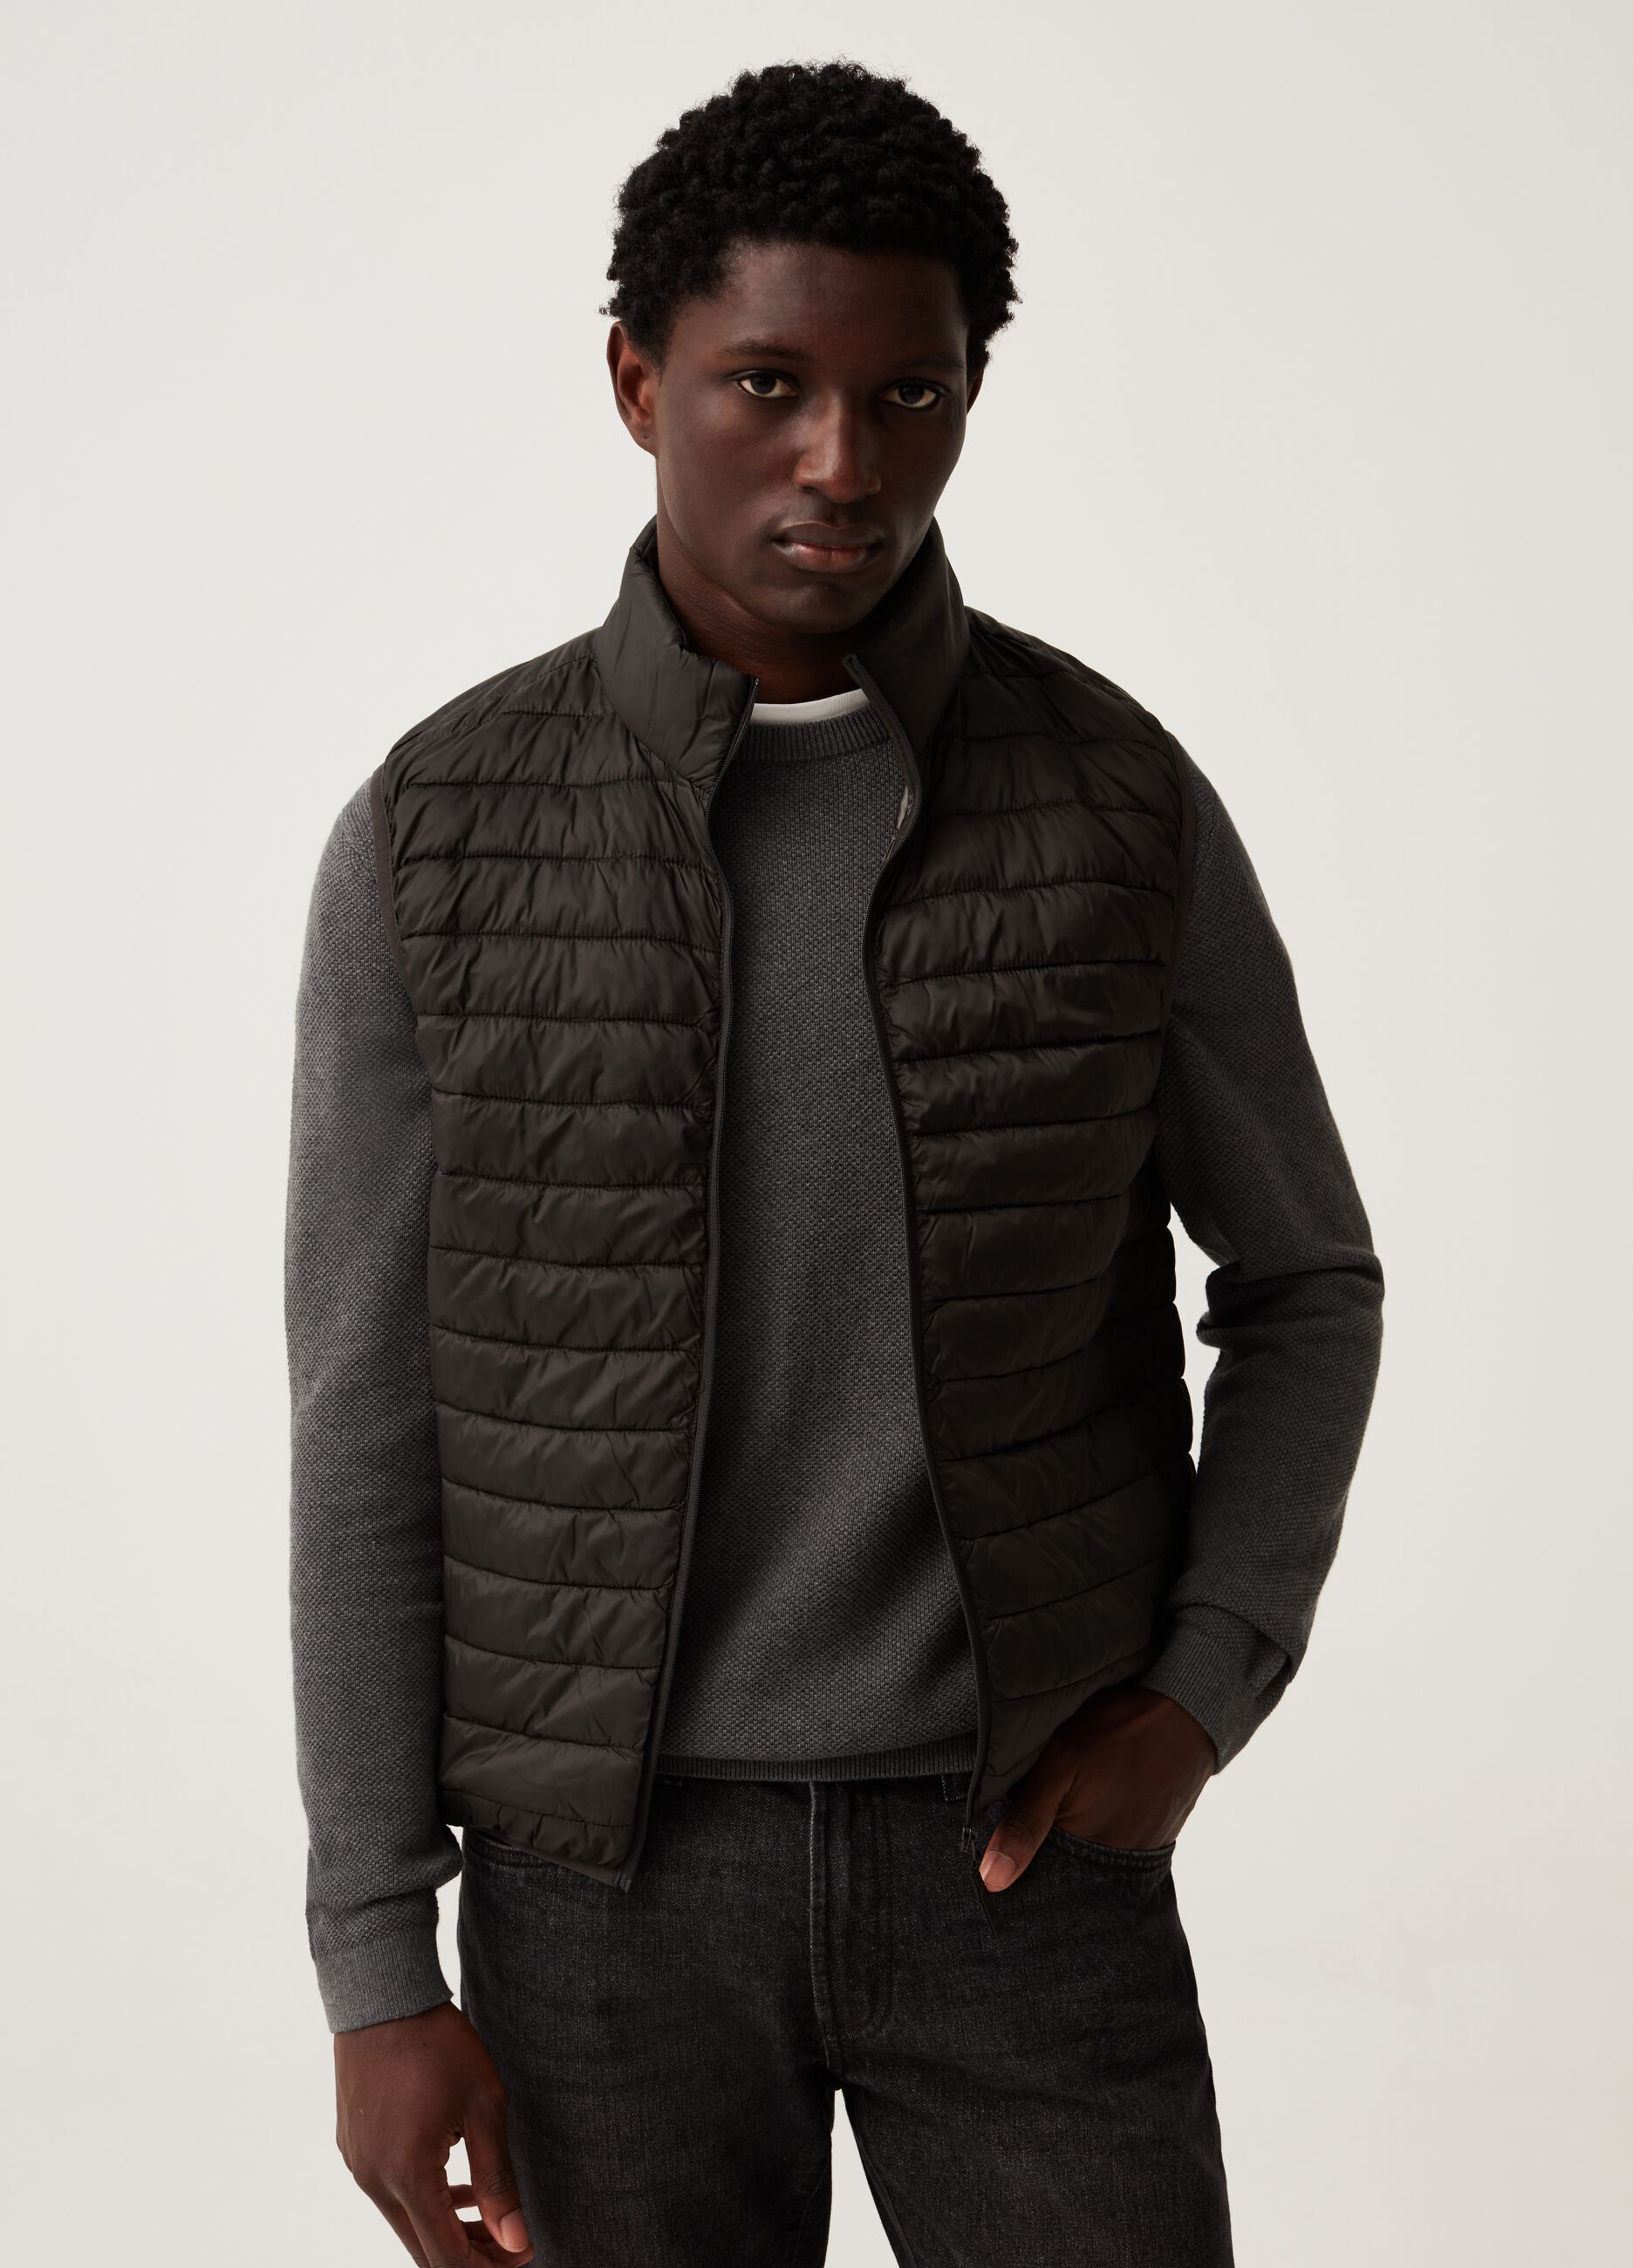 Reiss Brave - Hybrid Zip Through Quilted Jumper in Charcoal, Mens